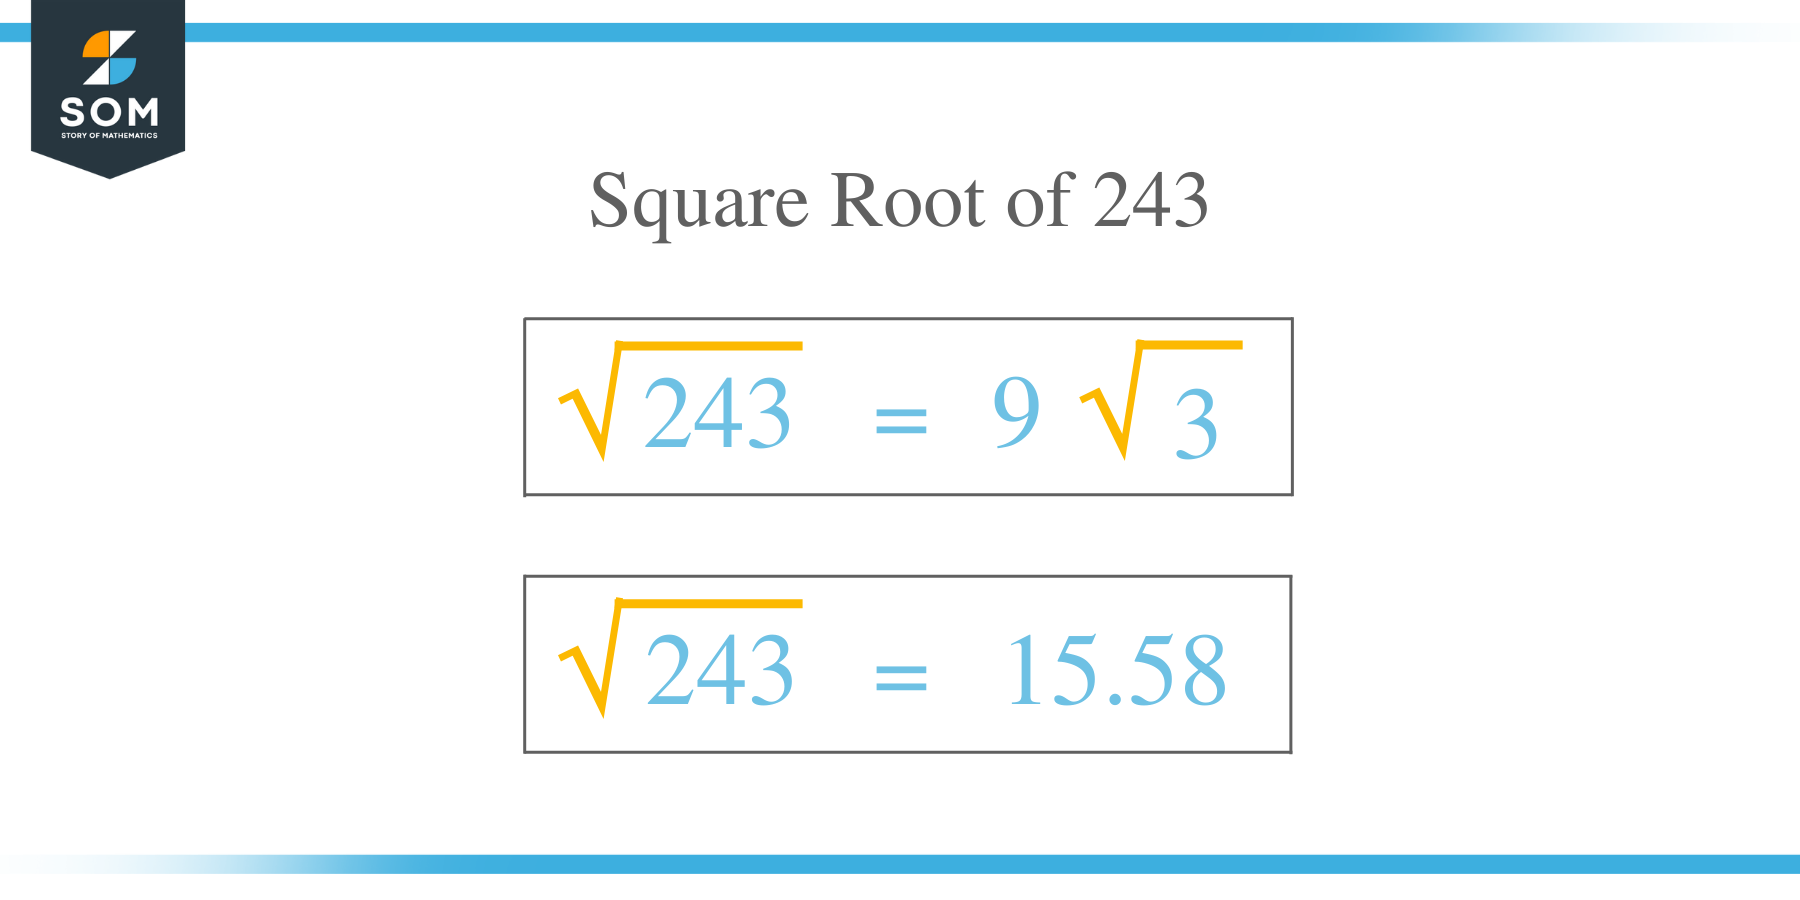 Square Root of 243